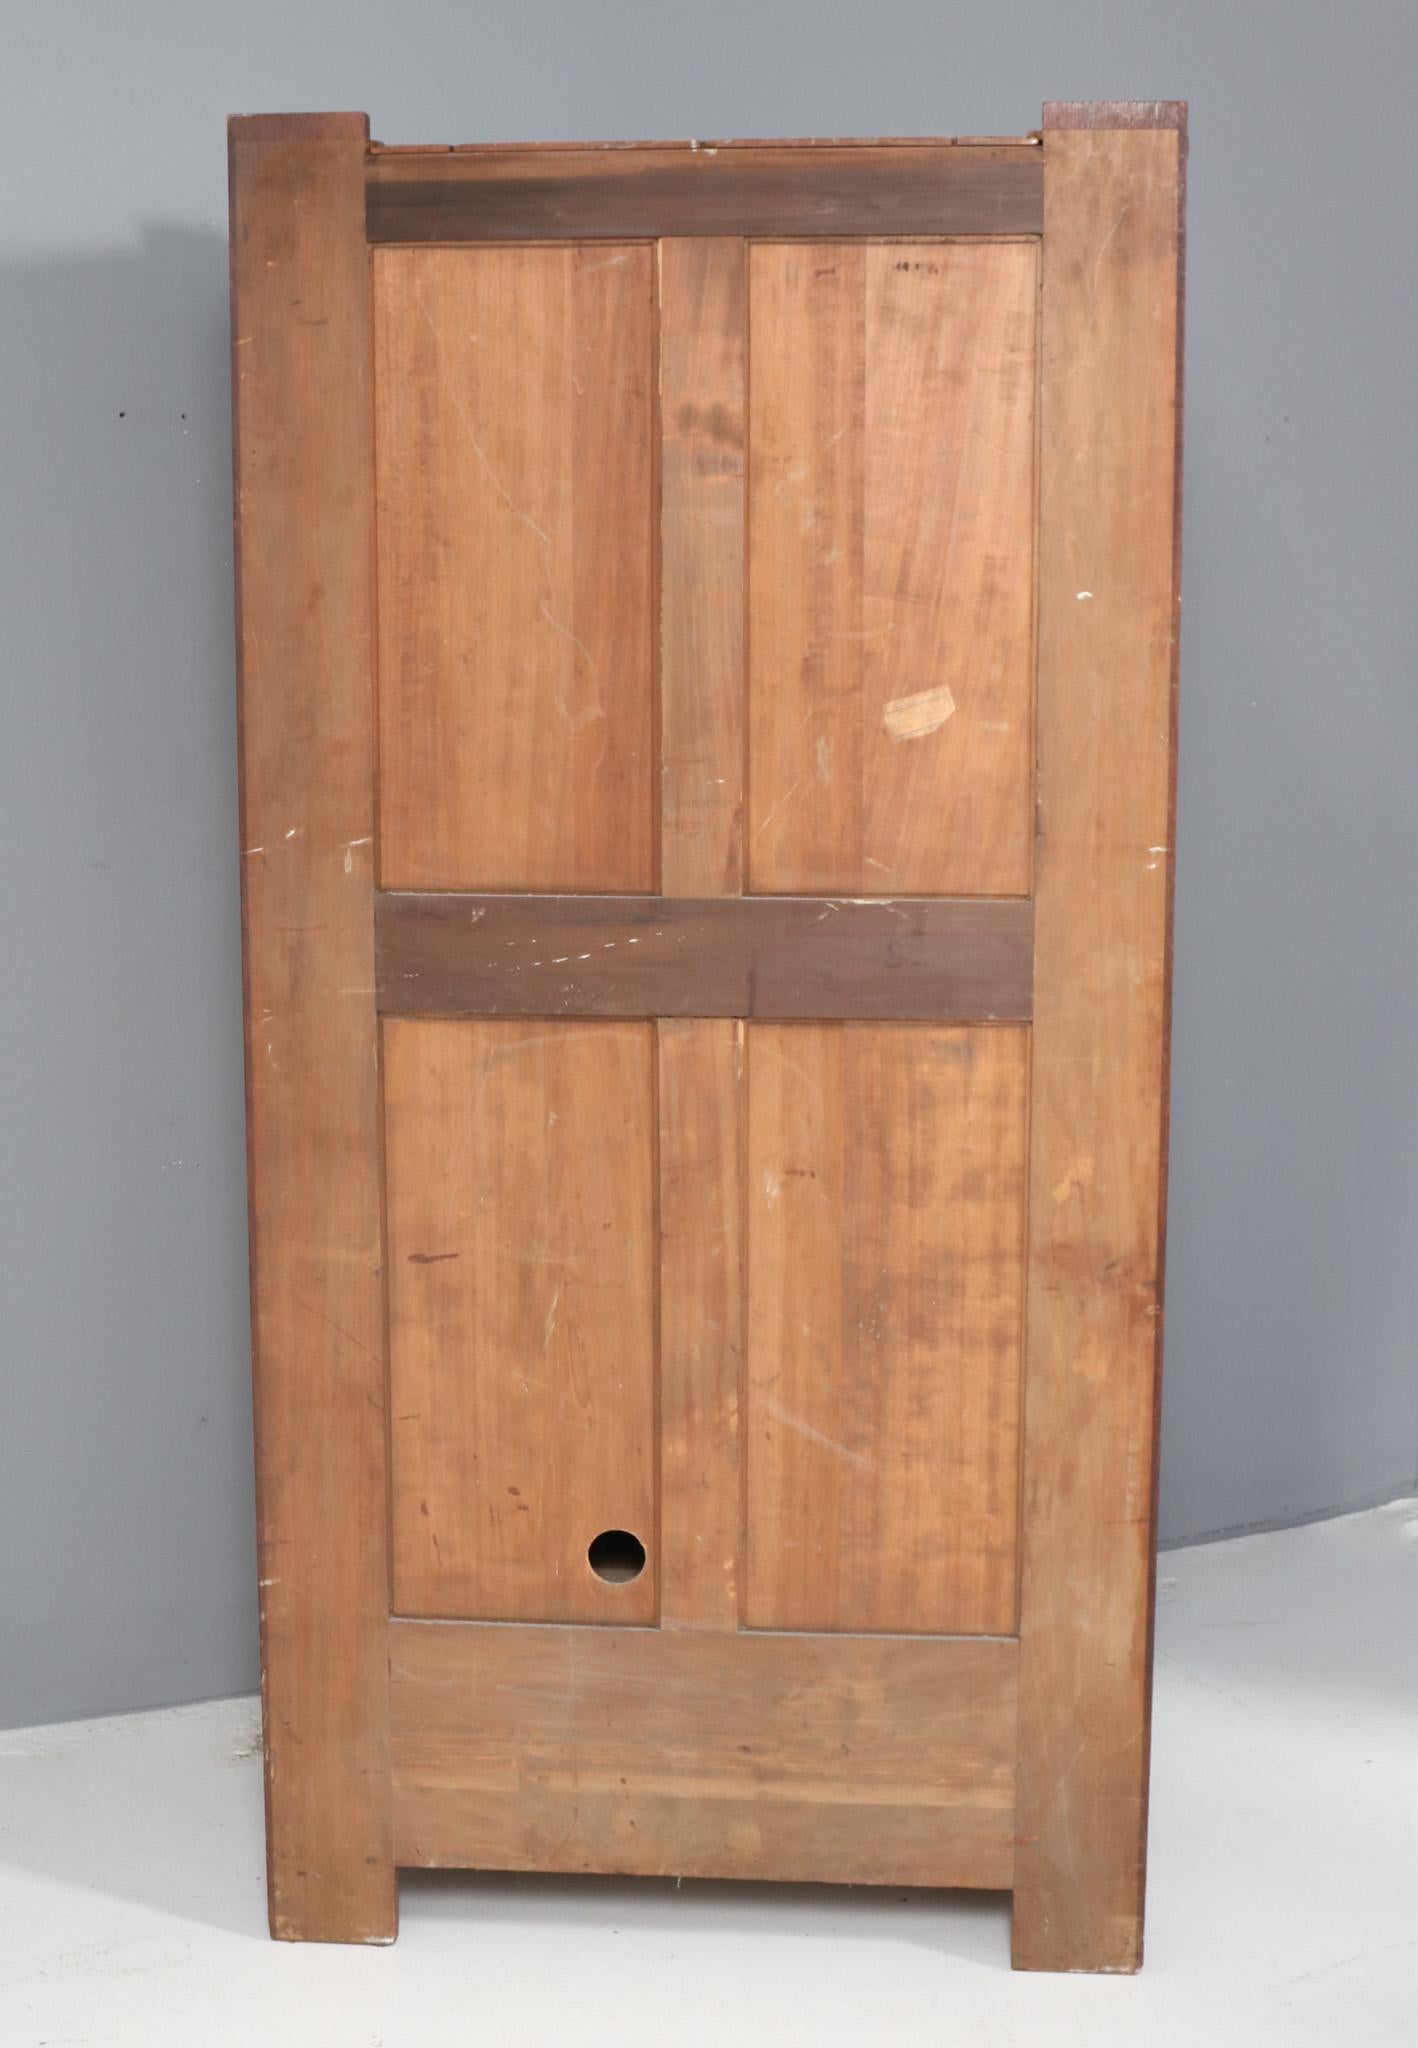 Early 20th Century Oak Art Deco Modernist Armoire or Wardrobe by Hendrik Wouda for Pander, 1924 For Sale